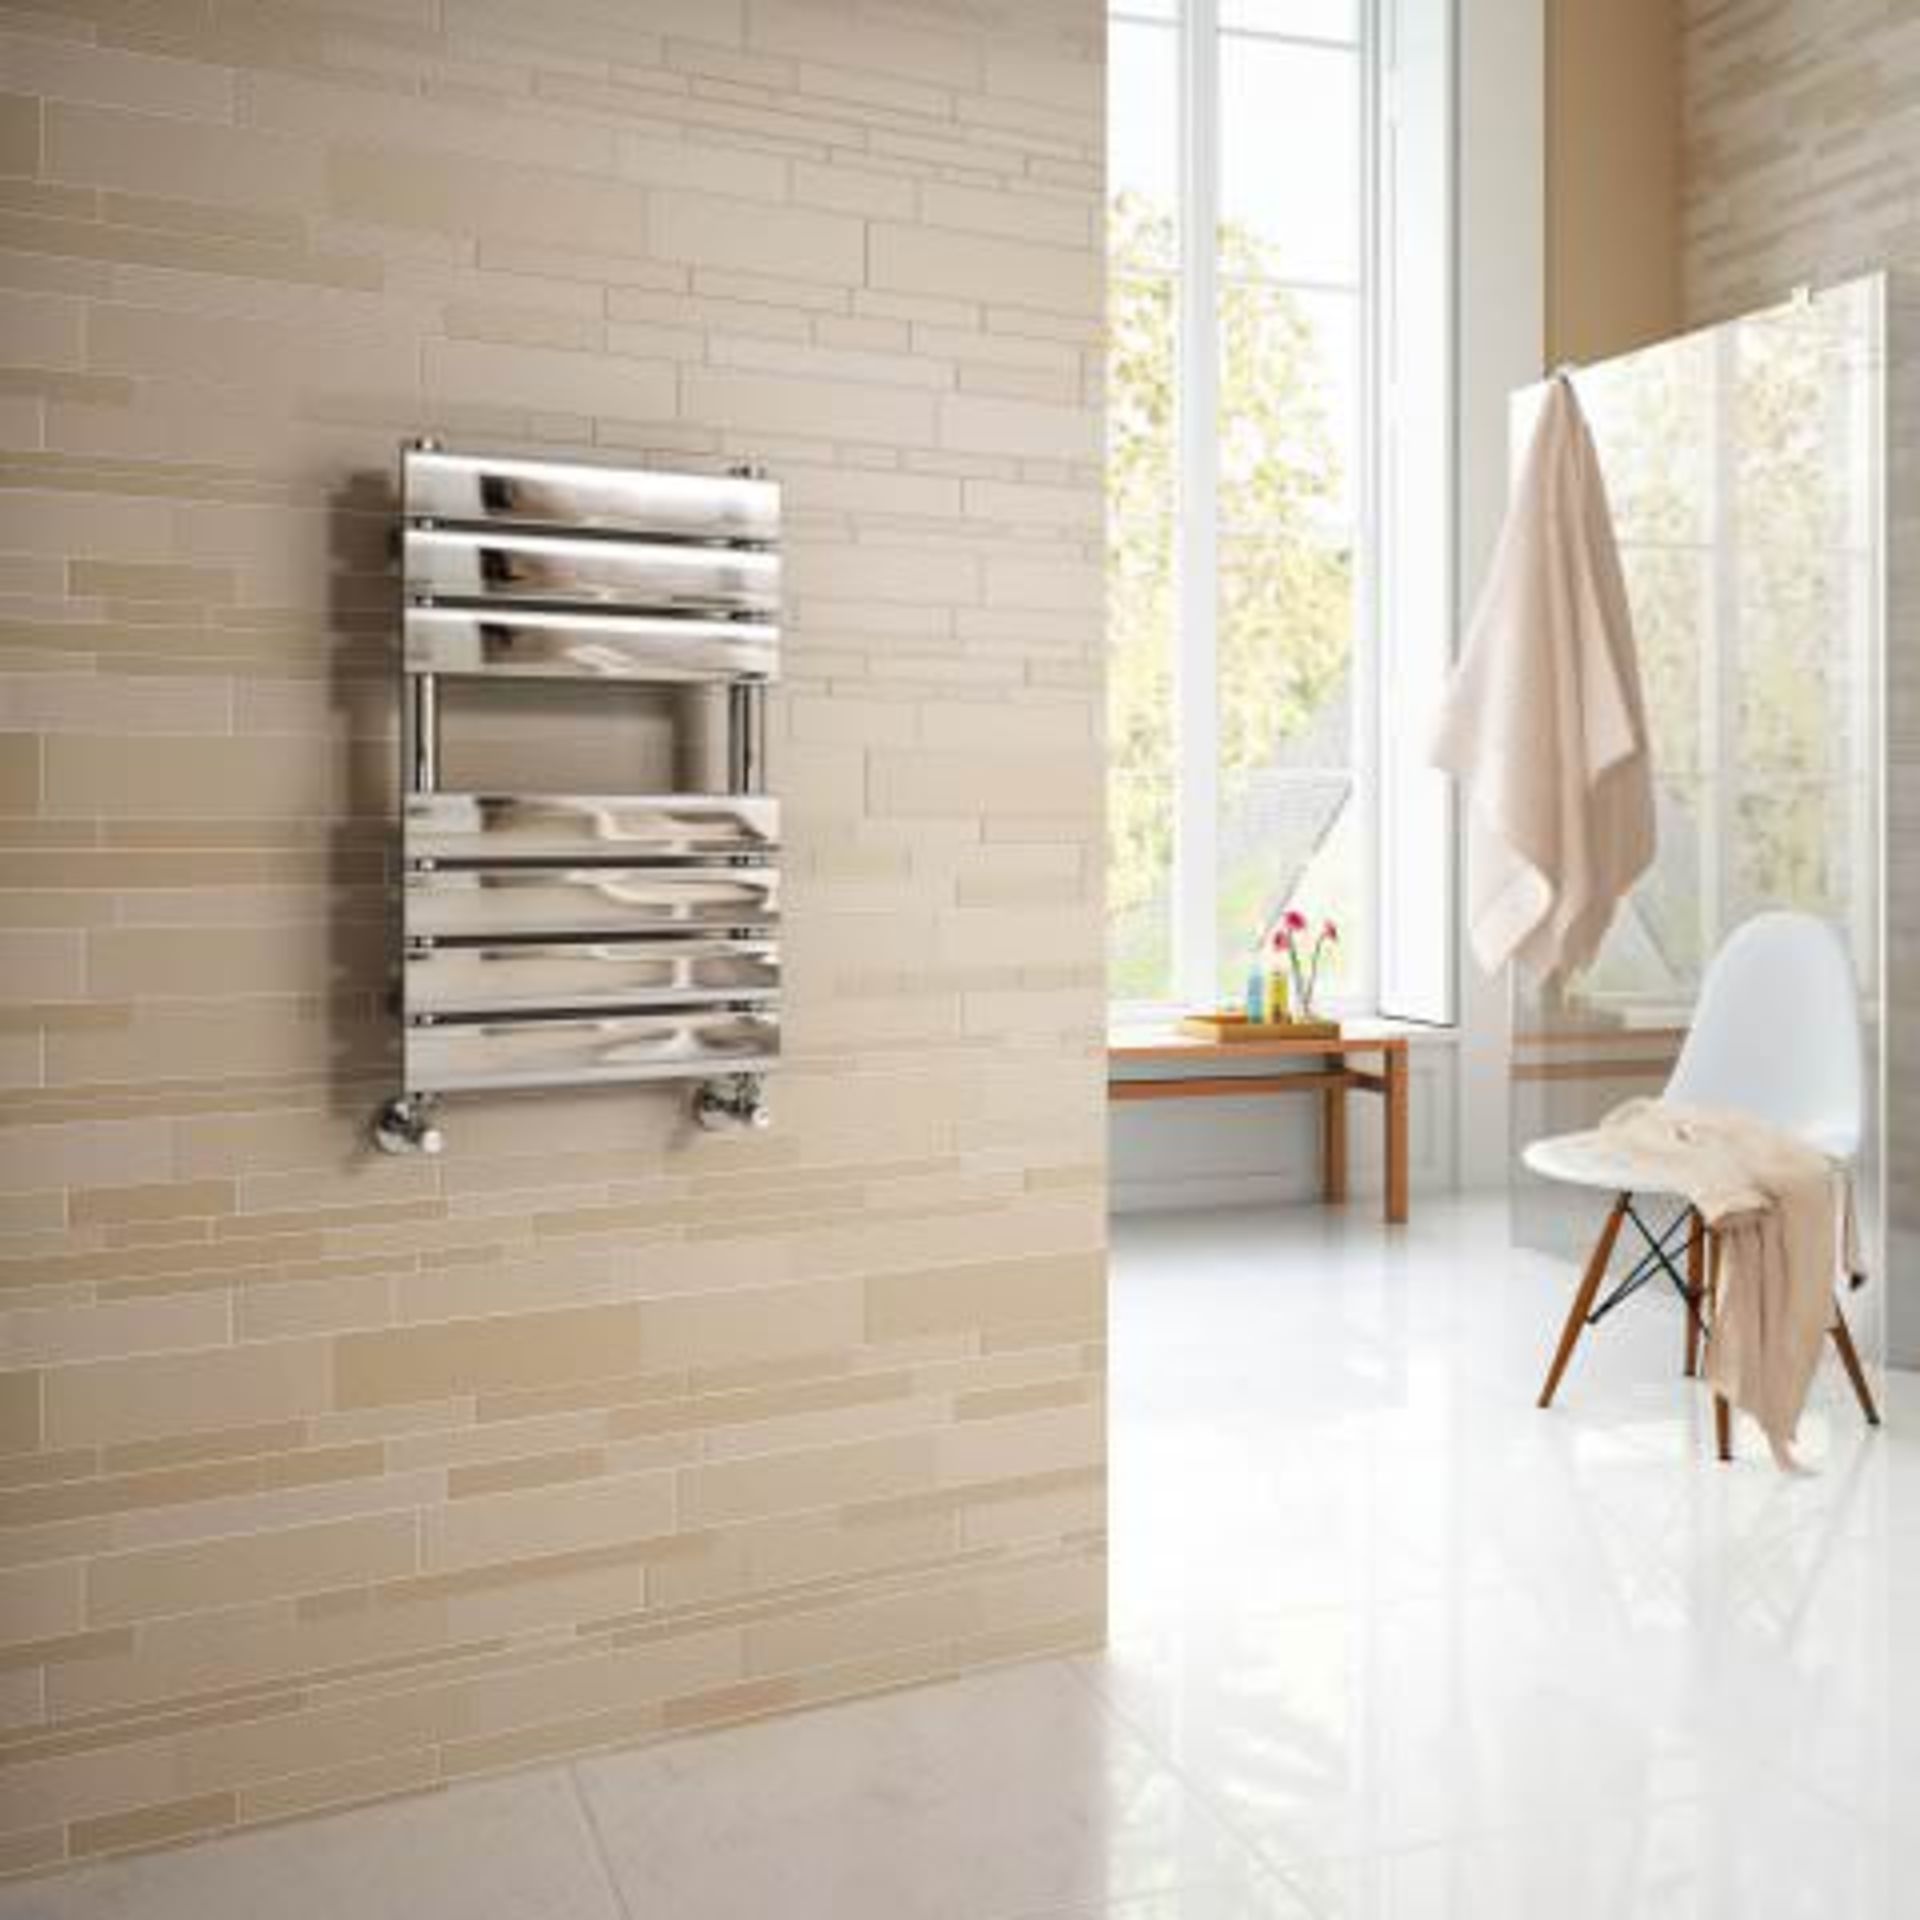 (A41) 650x400mm Chrome Flat Panel Ladder Towel Radiator RRP £179.99 Designer Touch For ultimate - Image 2 of 3